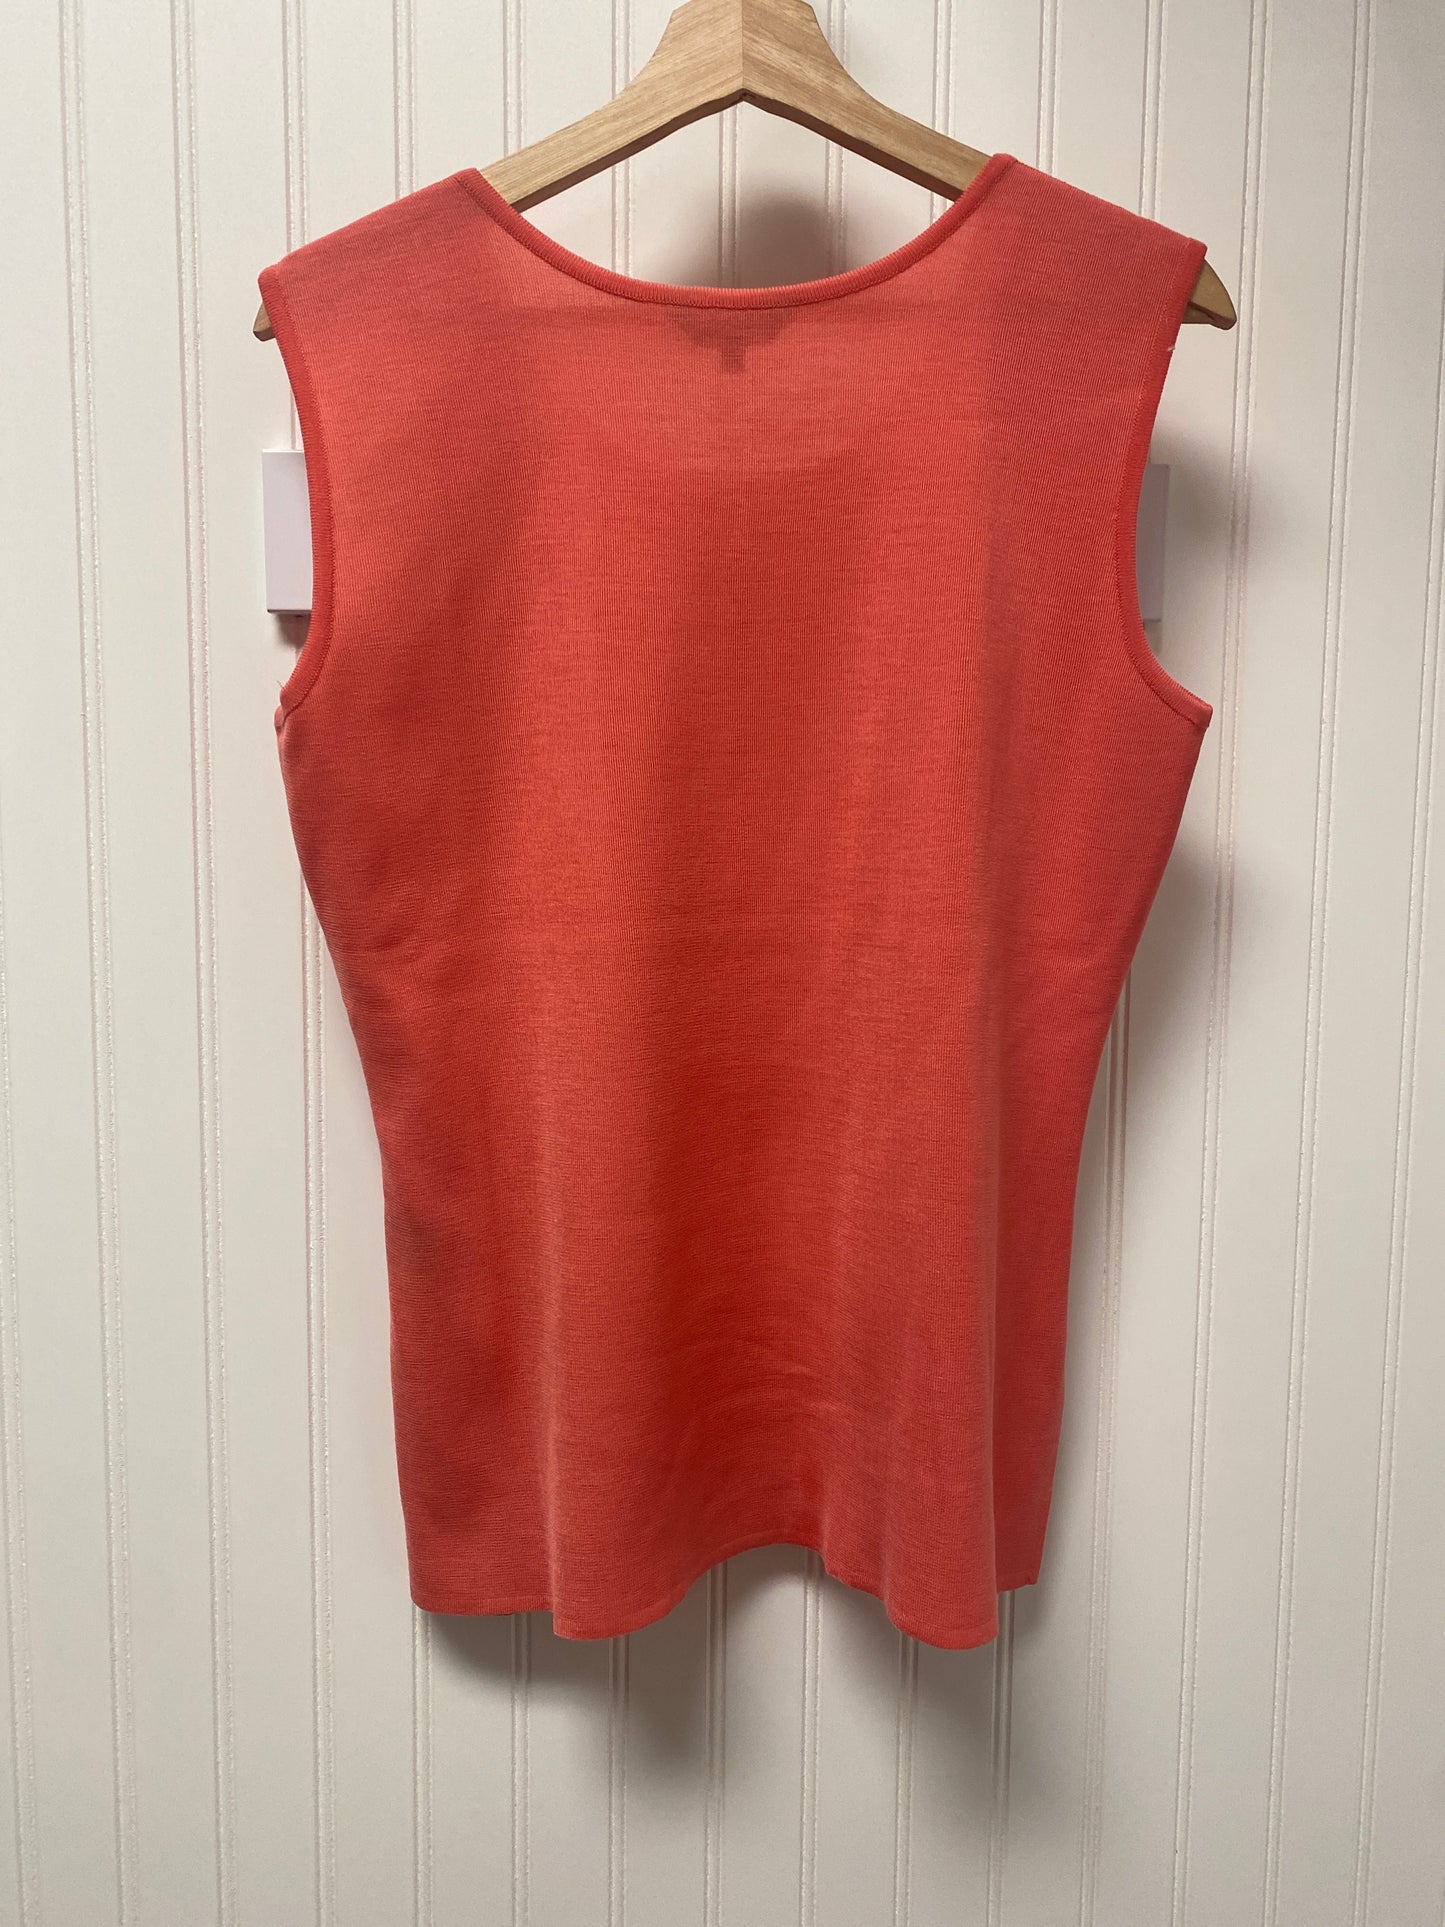 Top Sleeveless Designer By Misook  Size: M